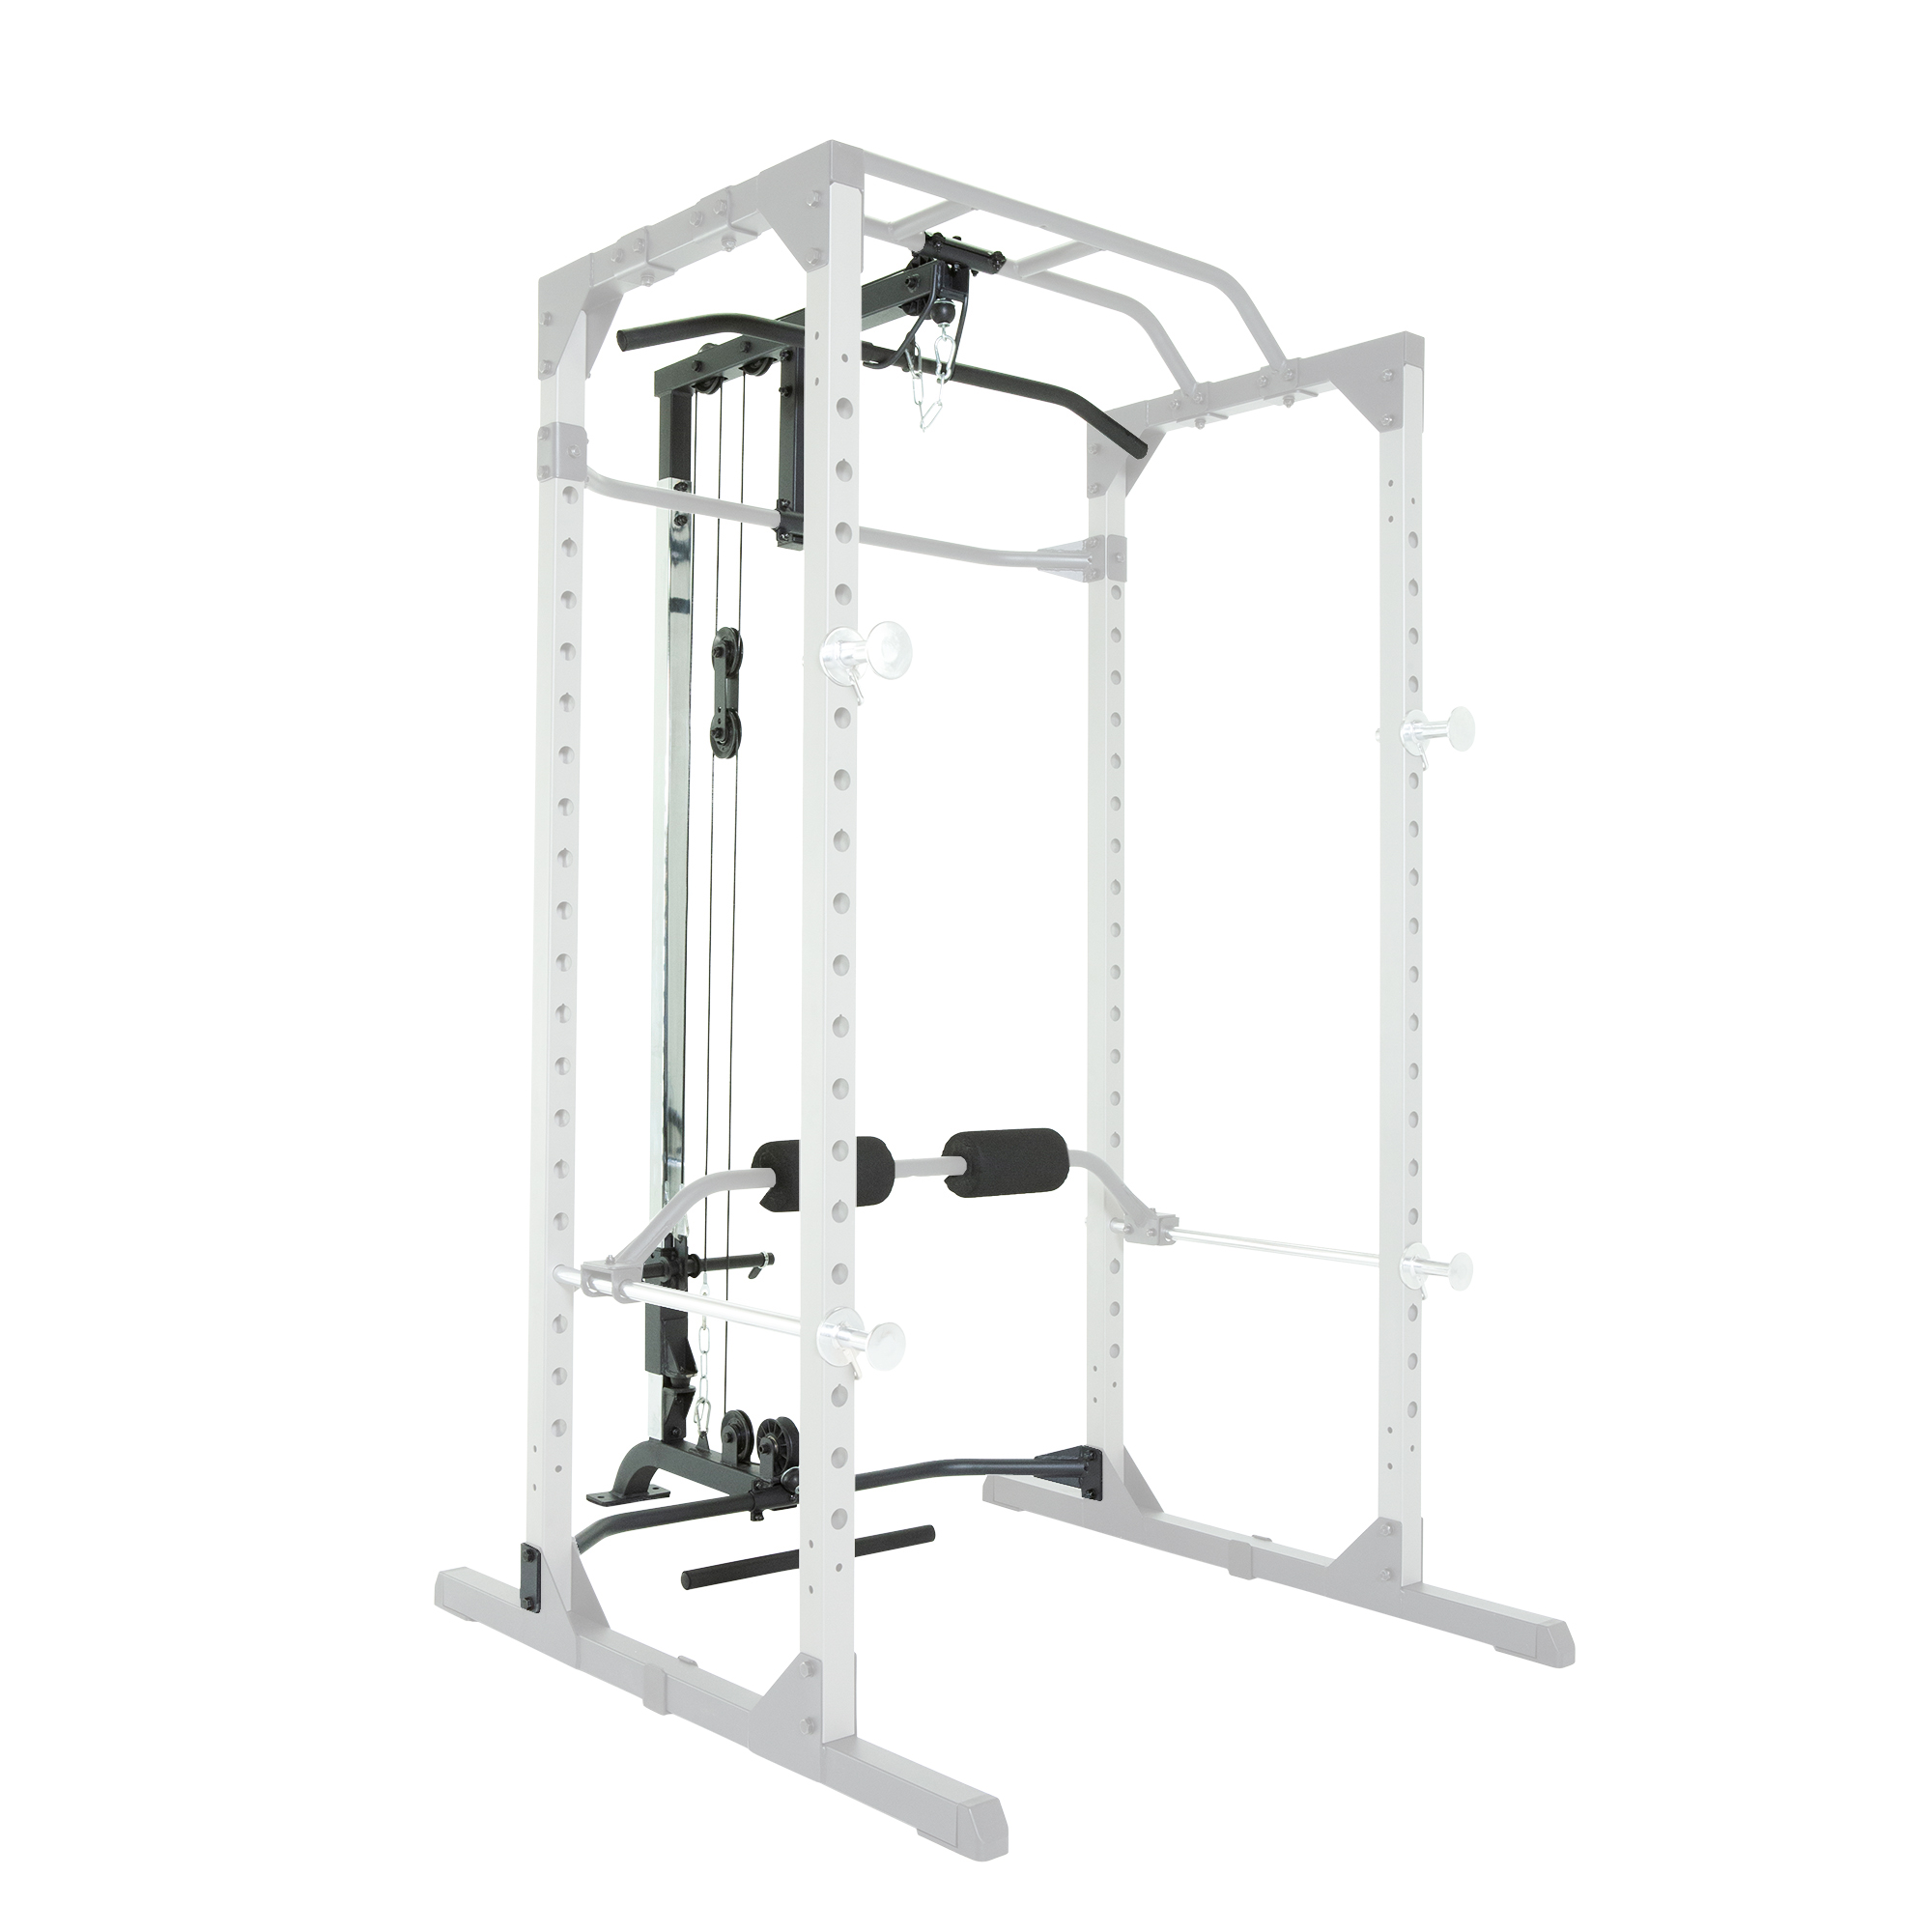 PROGEAR 310 Olympic Lat Pull Down and Low Row Cable Attachment for Progear 1600 Ultra Strength 800lb Weight Capacity Squat Stand Power Rack Cage with Lock-in J-Hooks - image 1 of 20